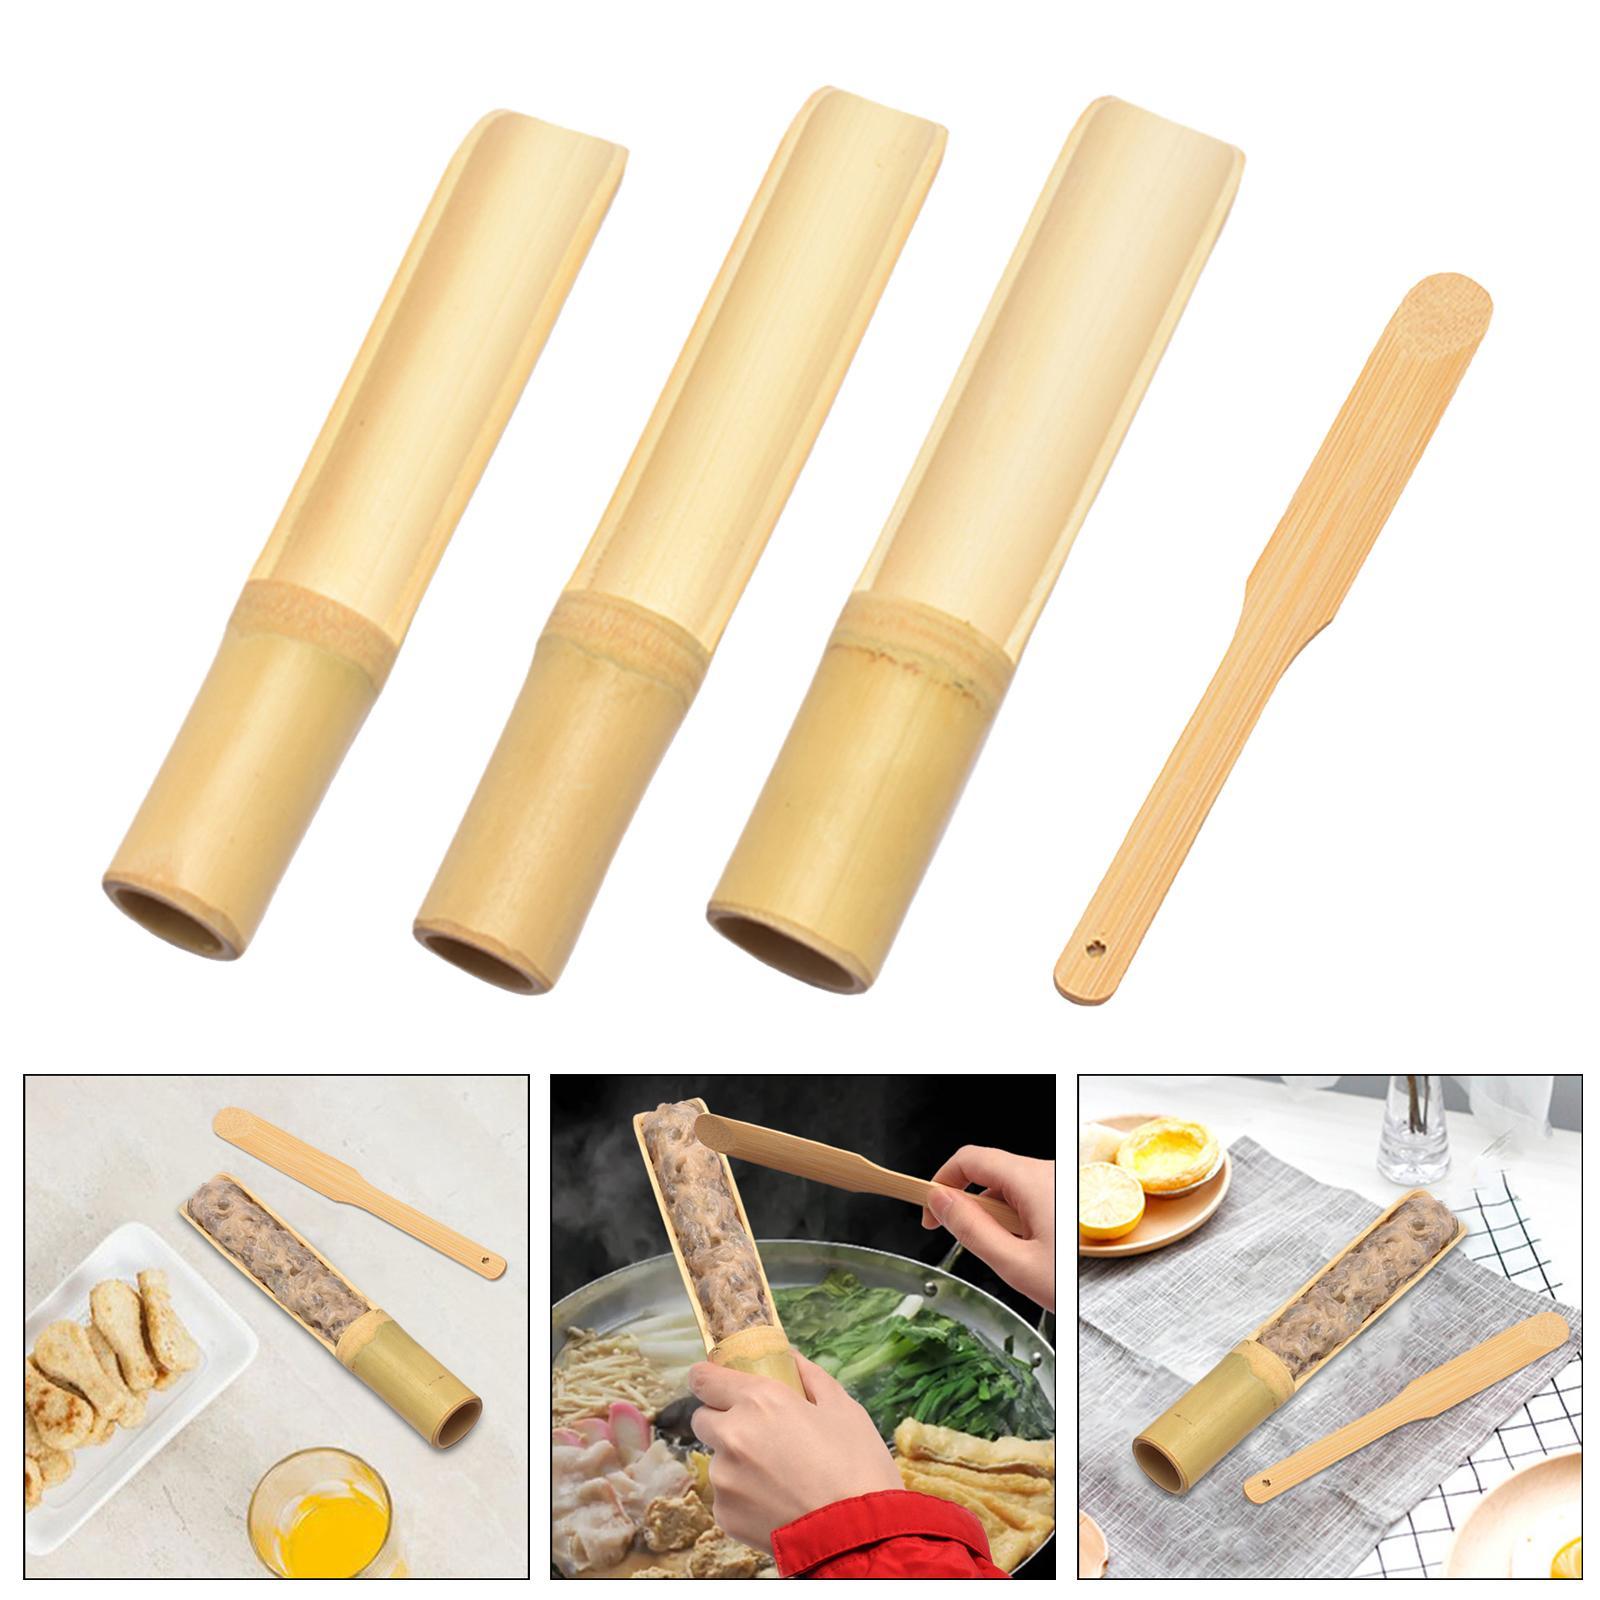 Bamboo Meatball Maker Tools Multifunction Utensils for Kitchen Cooking